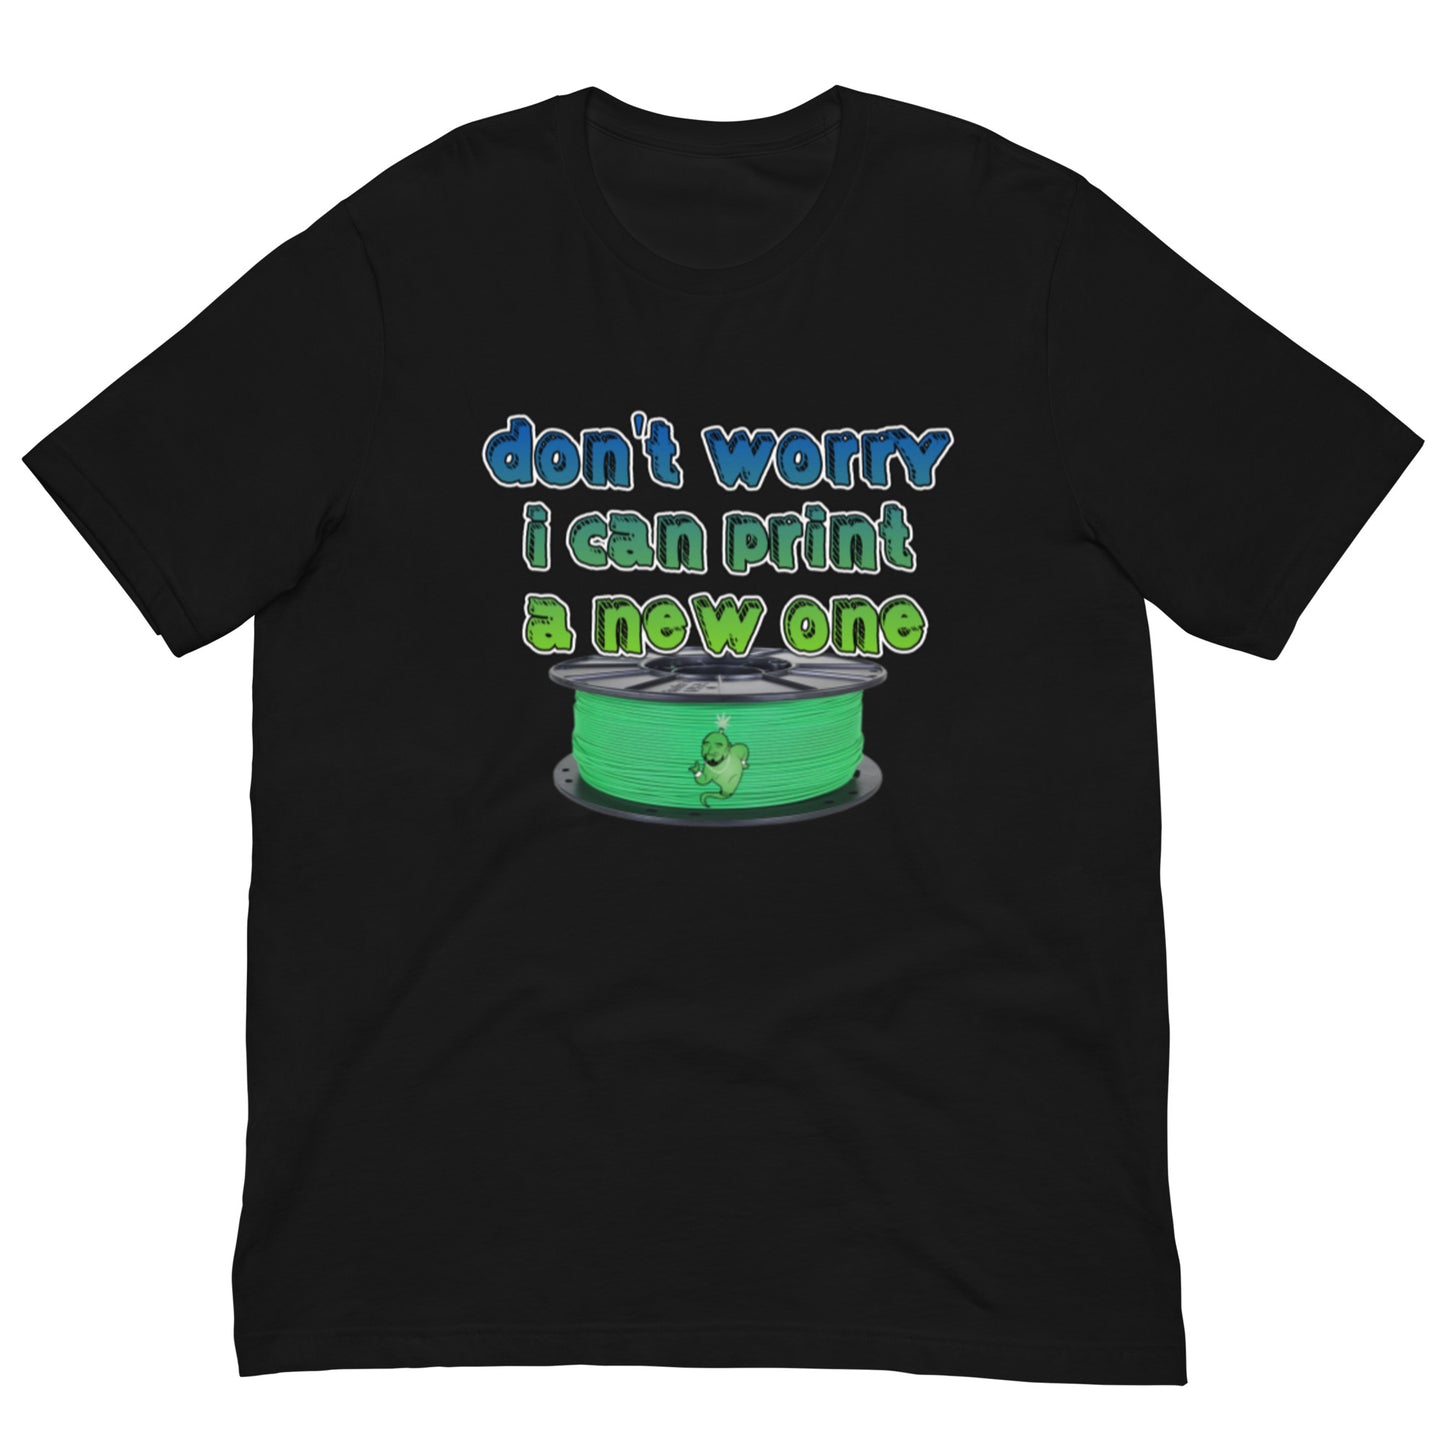 Don't worry I can print a NEW one! - TJC - t-shirt